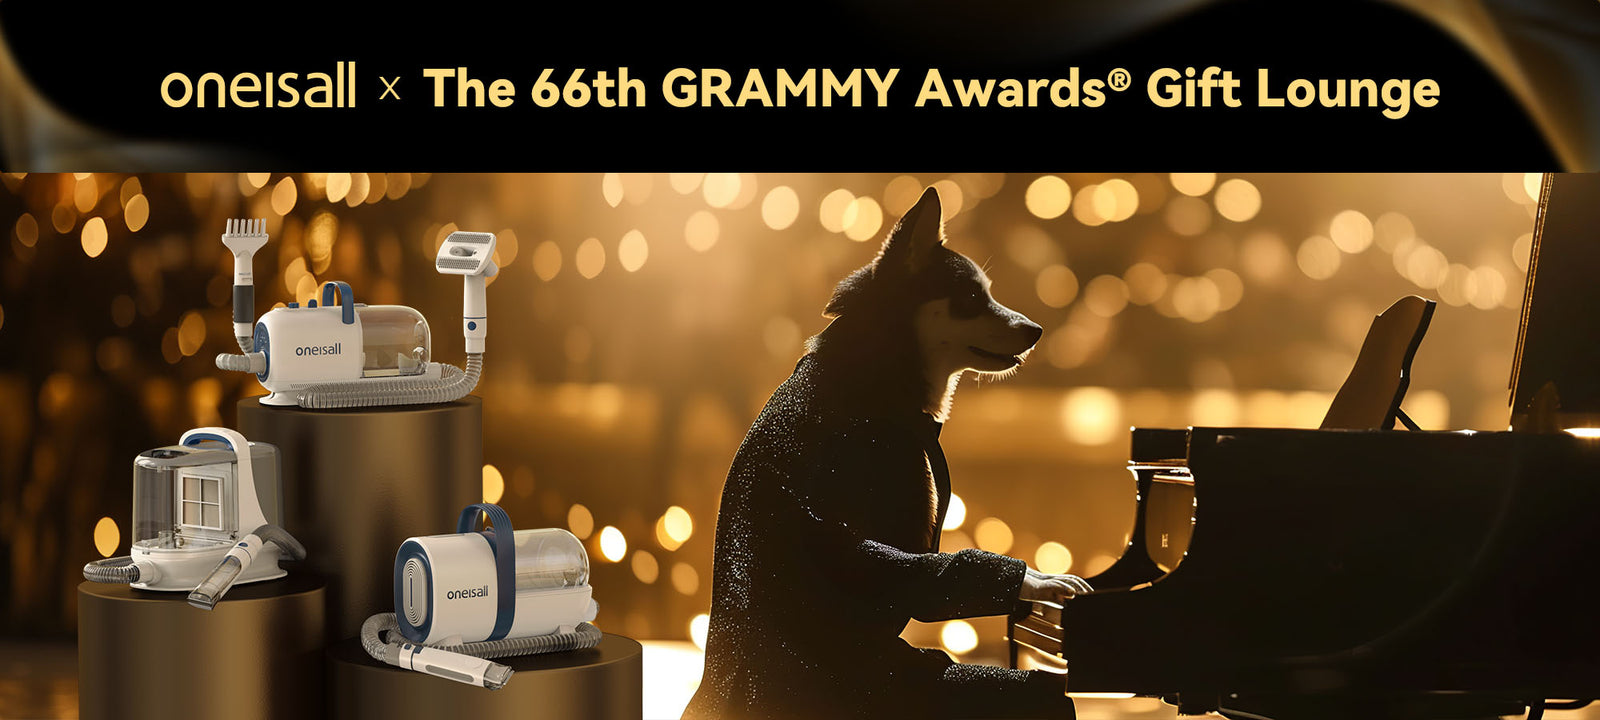 Oneisall@The Official Gift Lounge of the 66th GRAMMY Awards-pc.jpg__PID:62c57d1a-b7ac-4b80-bd17-5925a2b2434d